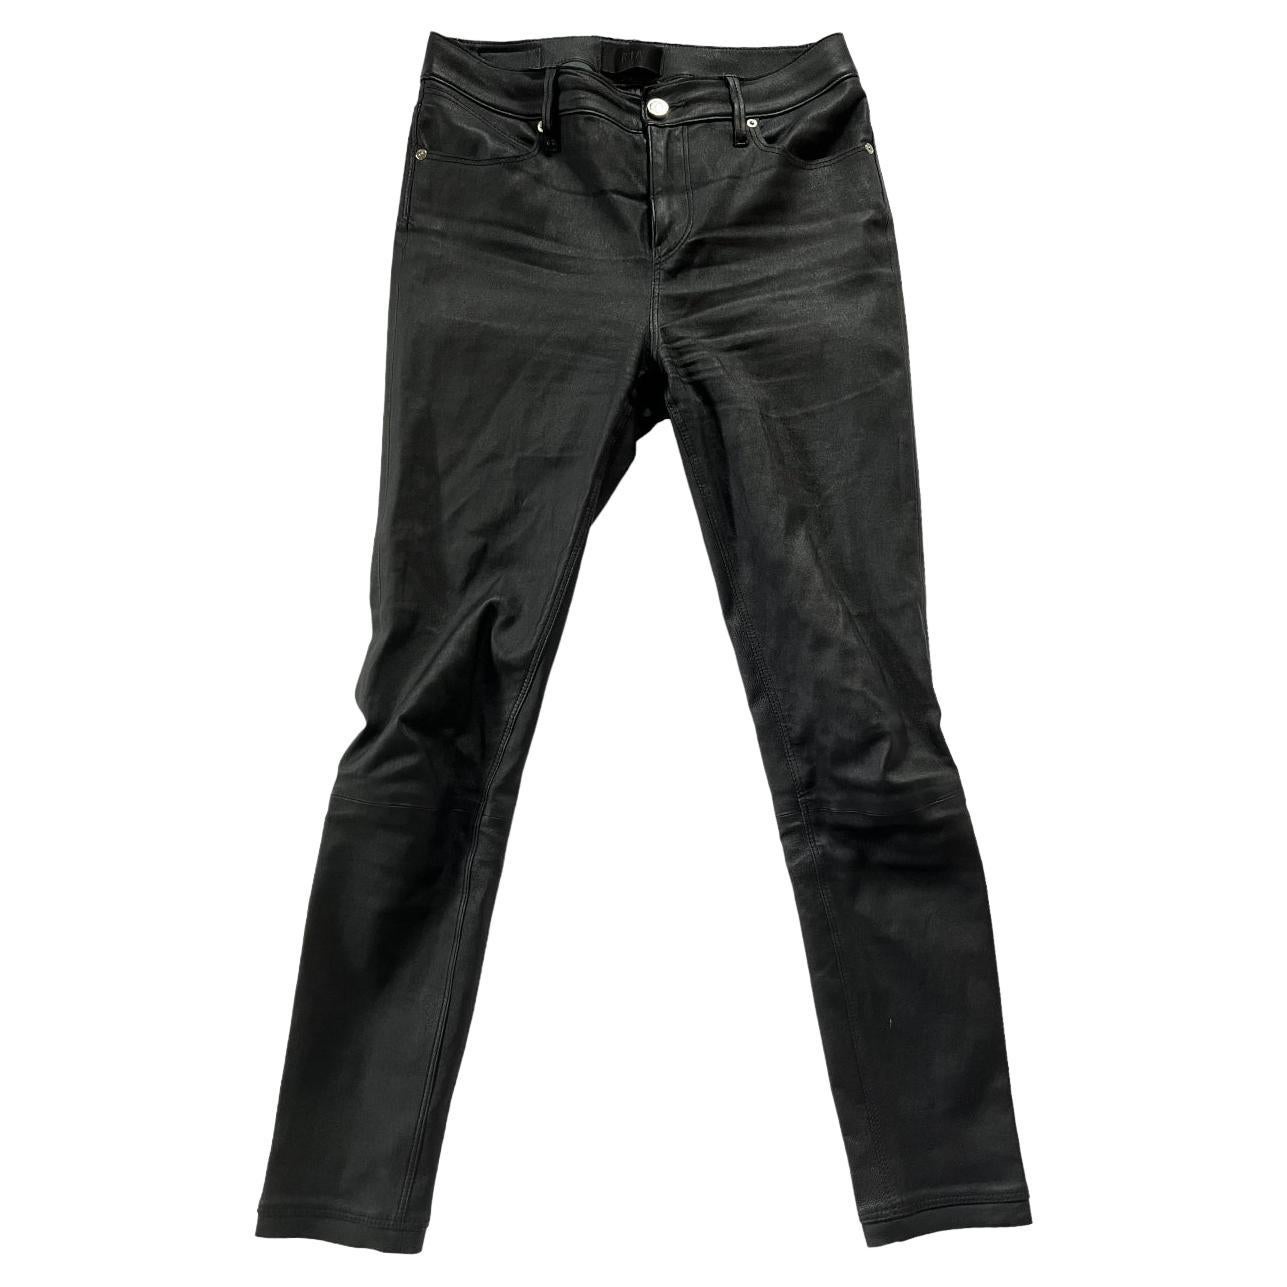 RtA Navy Leather Pants, Size 27 For Sale